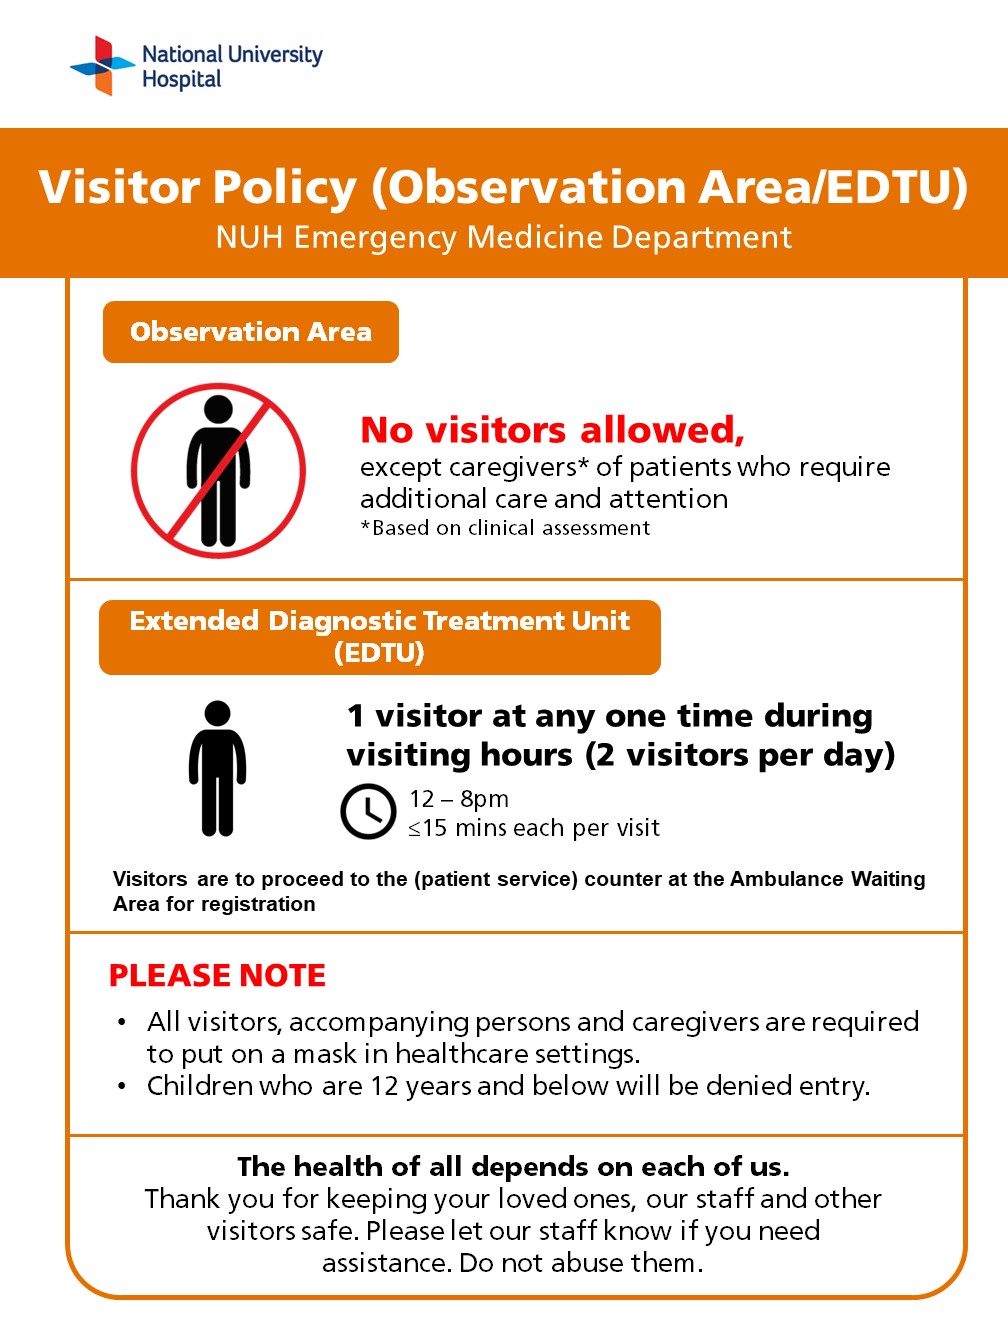 Visitor Policy and Registration